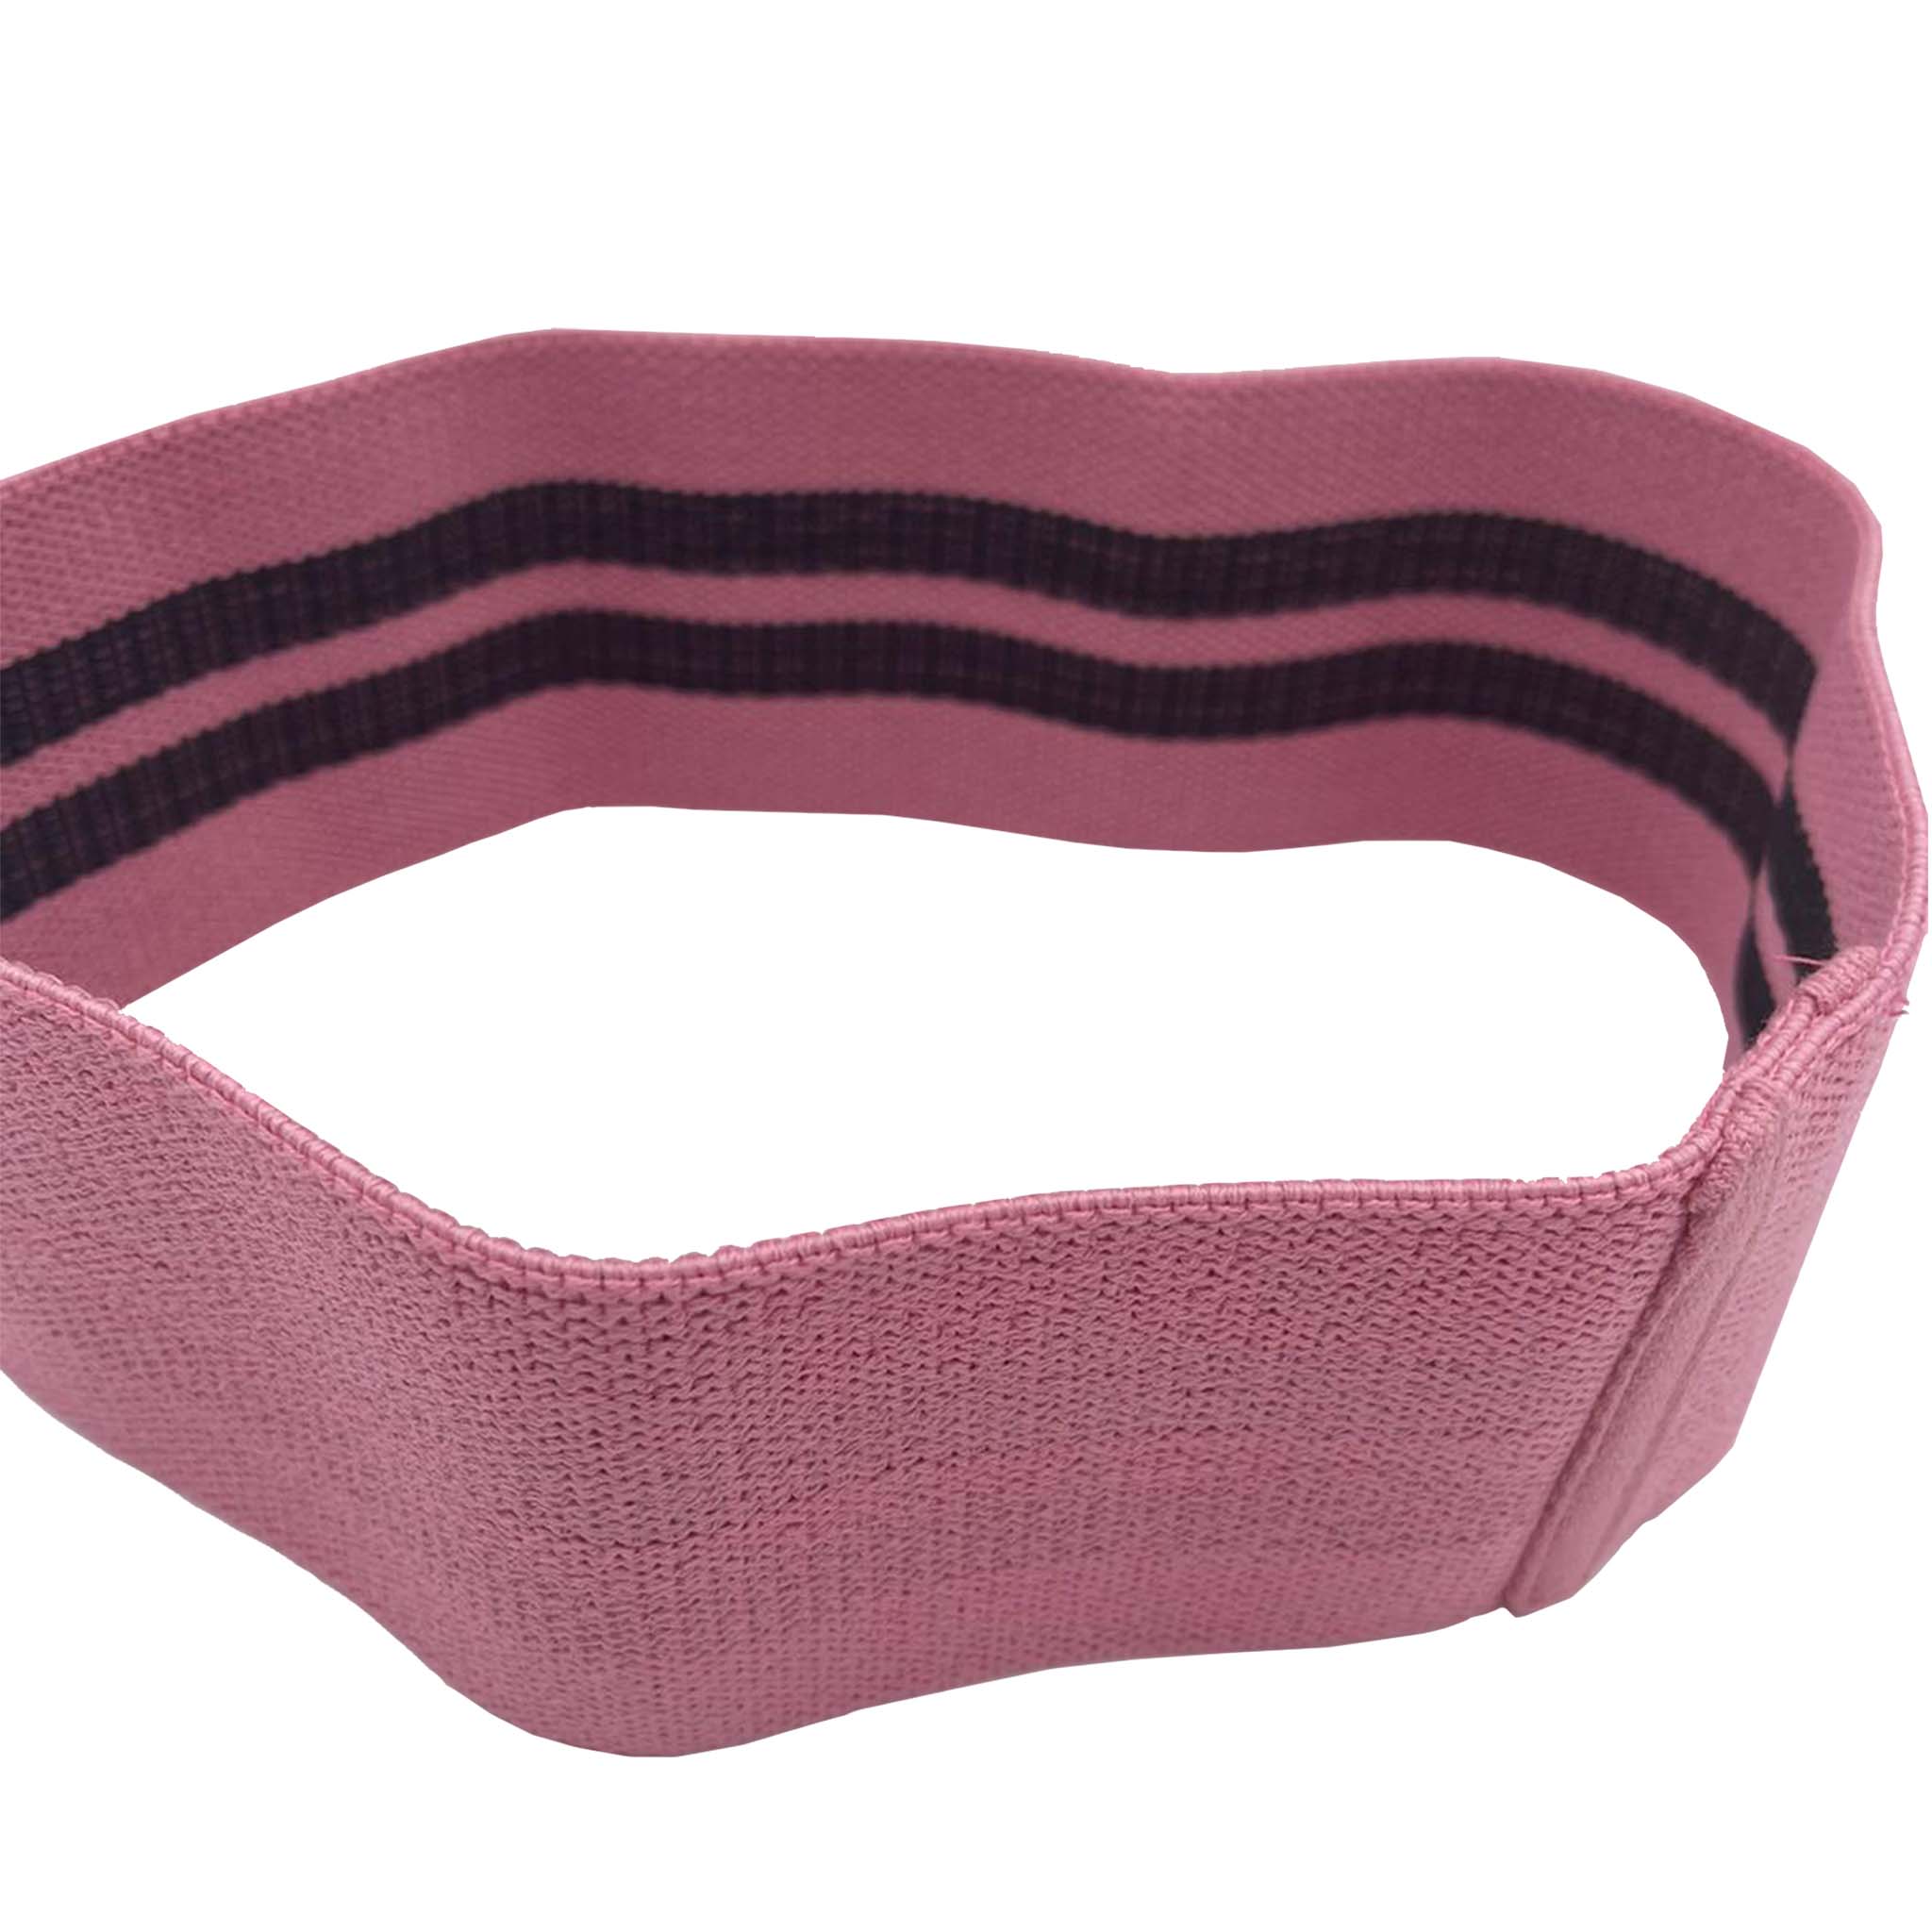 Resistance Loop Fabric Booty Band Anti-slip - Pink Set | INSOURCE